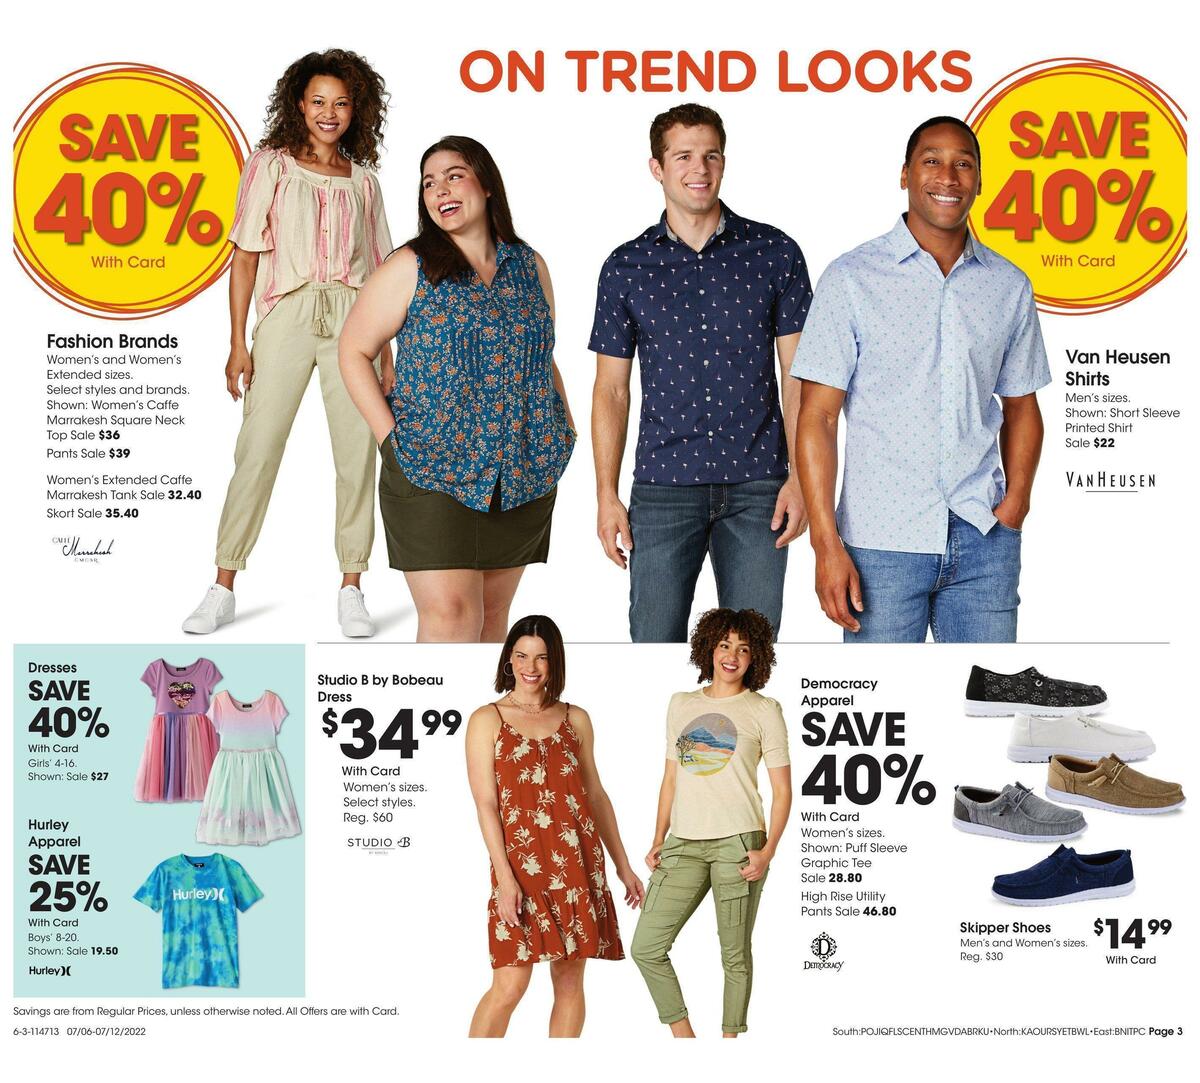 Fred Meyer General Merchandise Weekly Ad from July 6